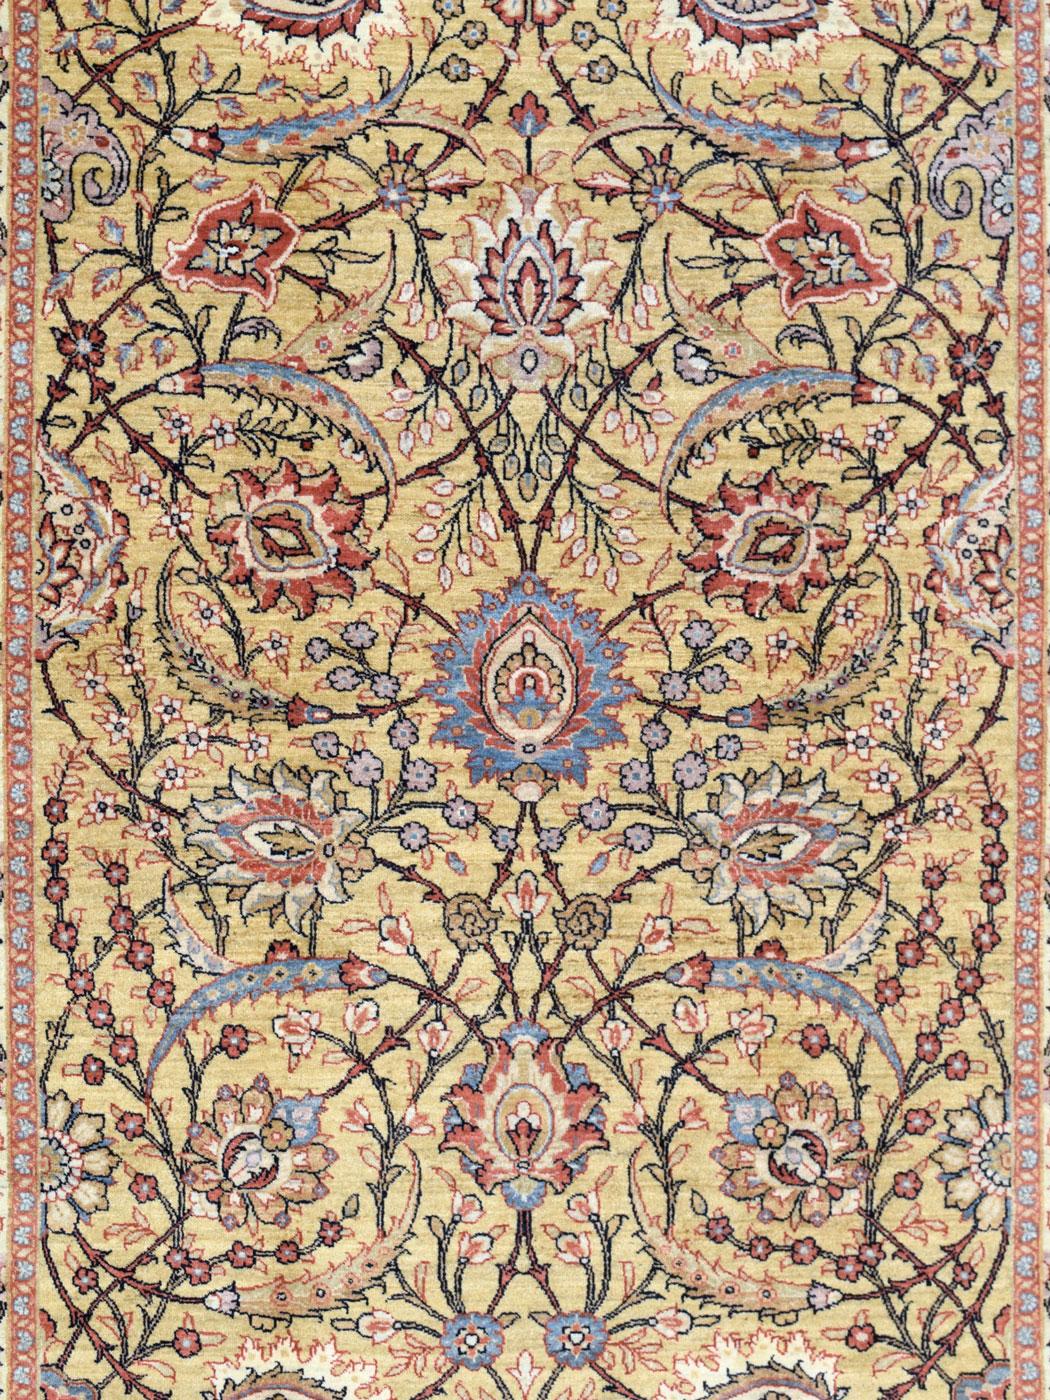 This 5' x 7' pure wool Persian area rug in cream, red, and blue has been handknotted in the Orley Shabahang Mohtasham weave. Measuring exactly 4'7